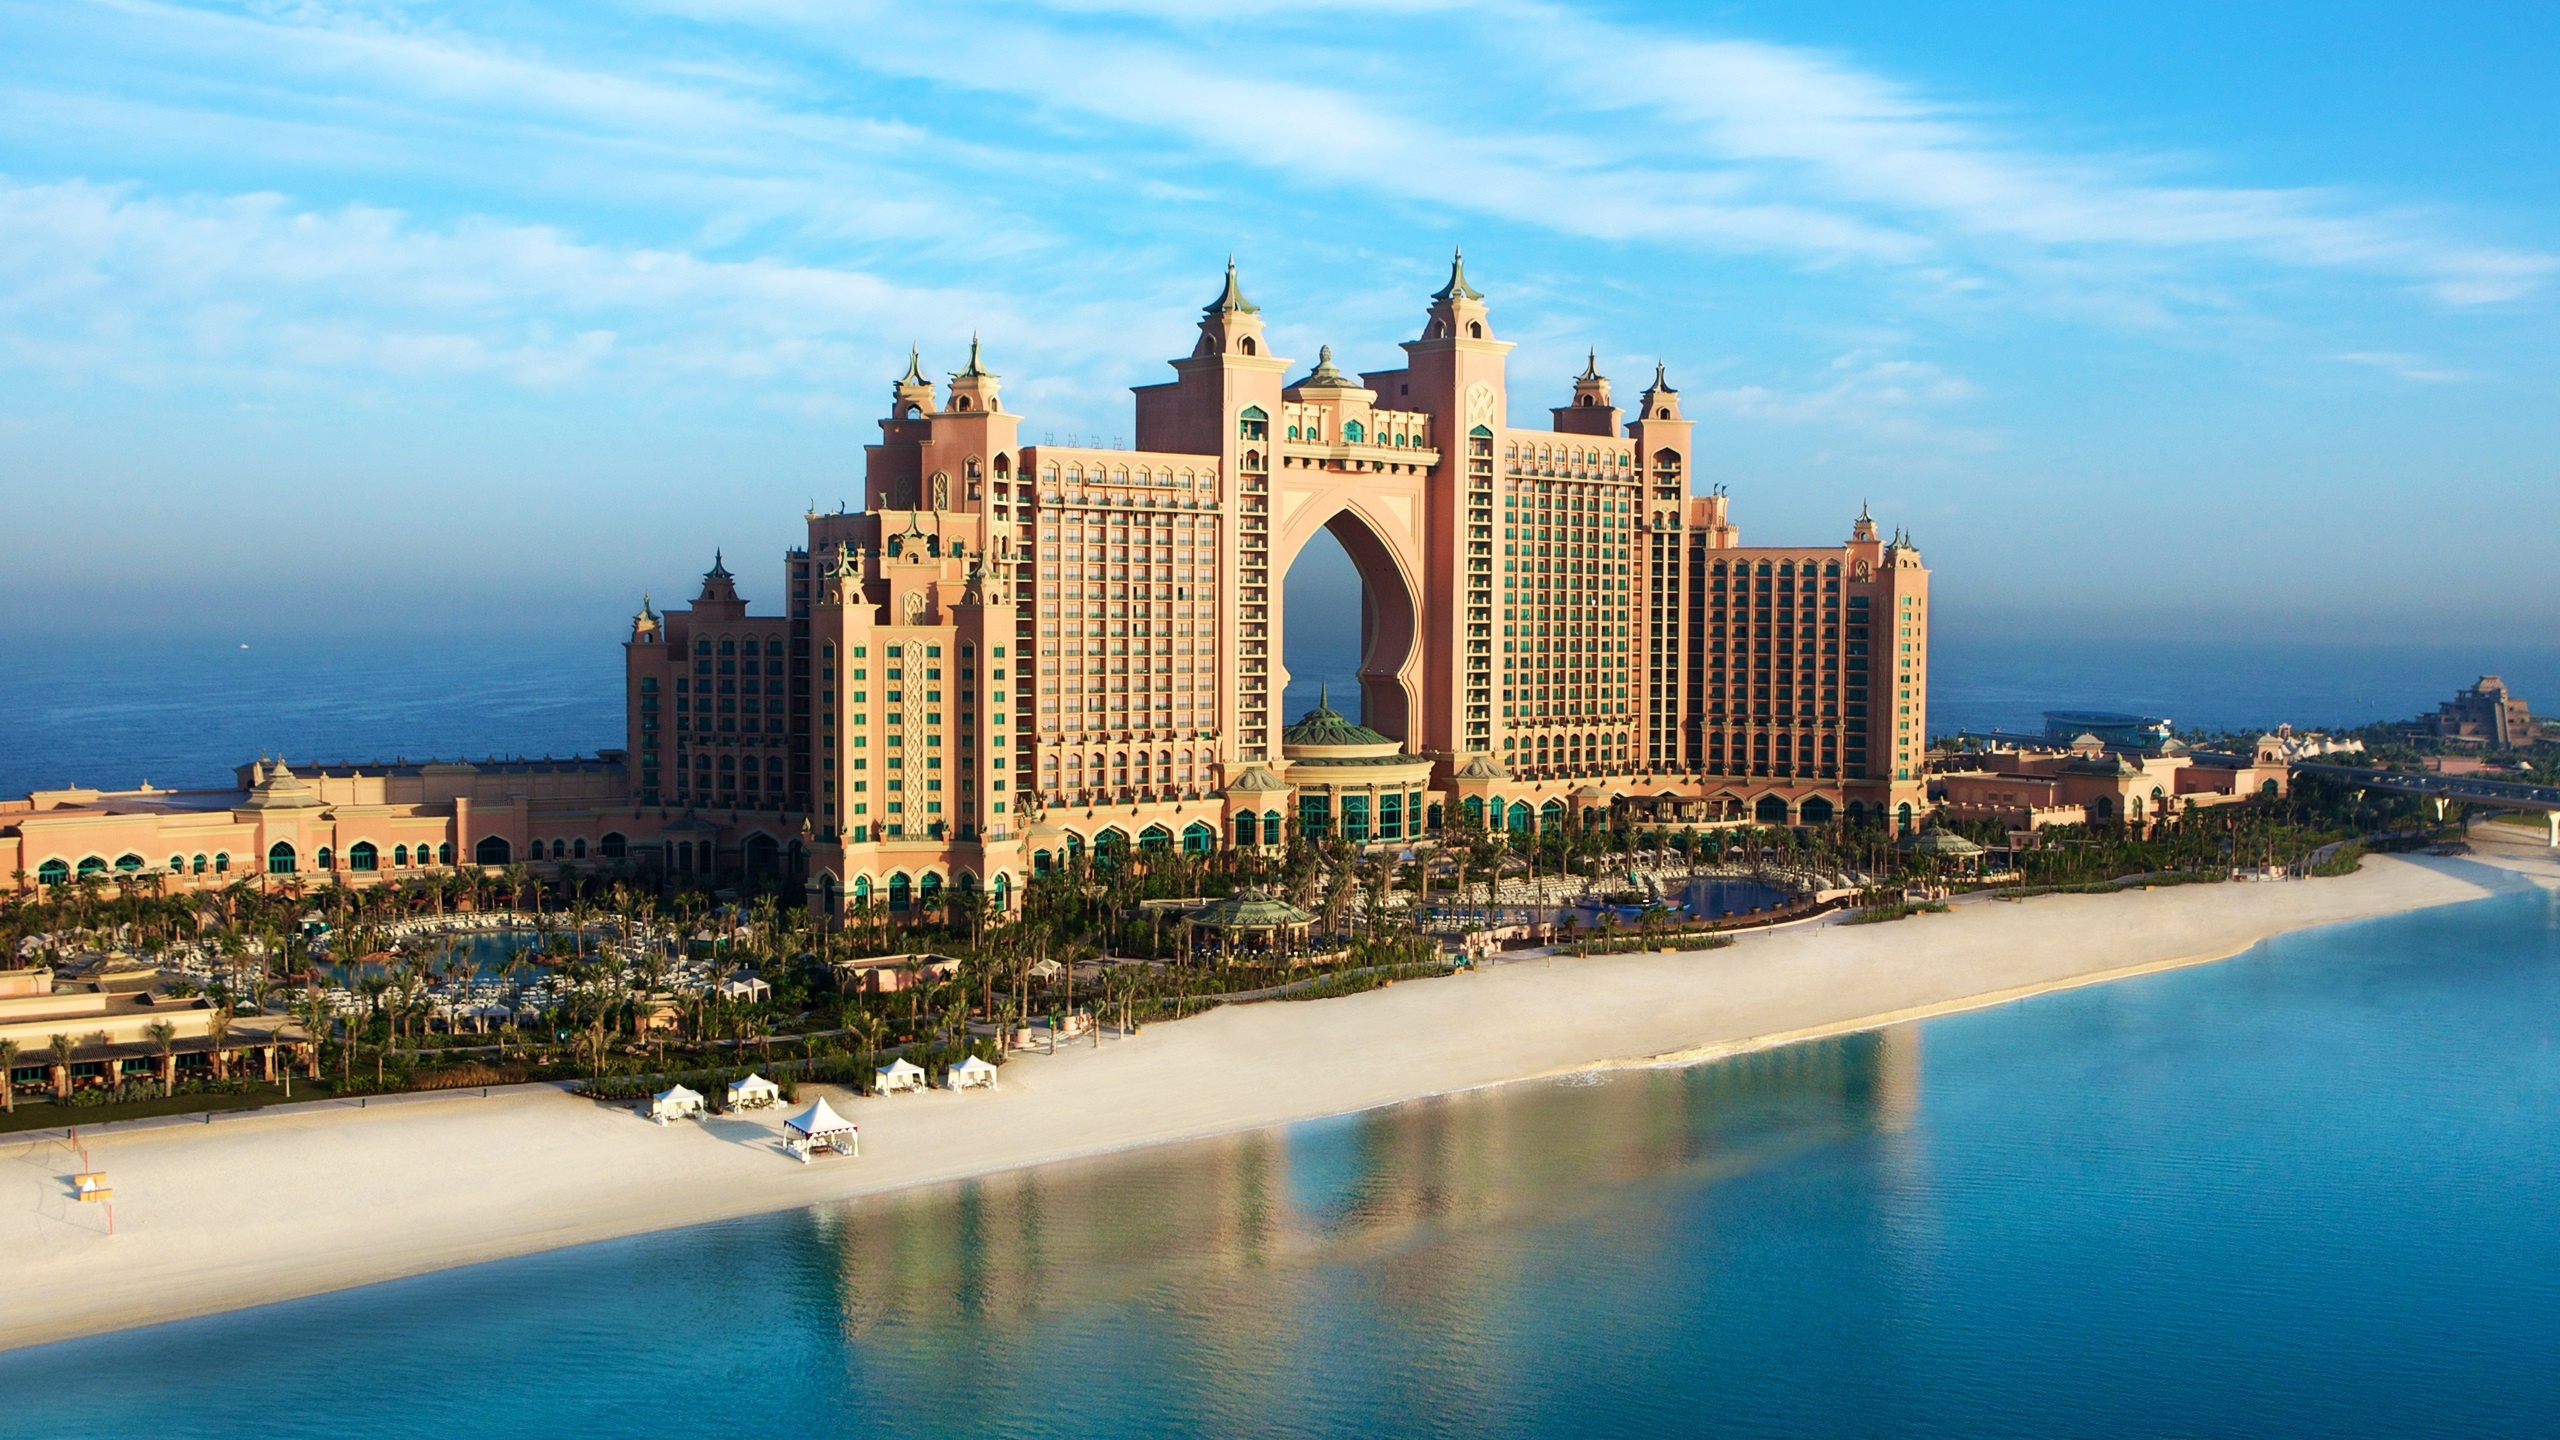 Atlantis The Palm Dubai Wallpapers in jpg format for free download